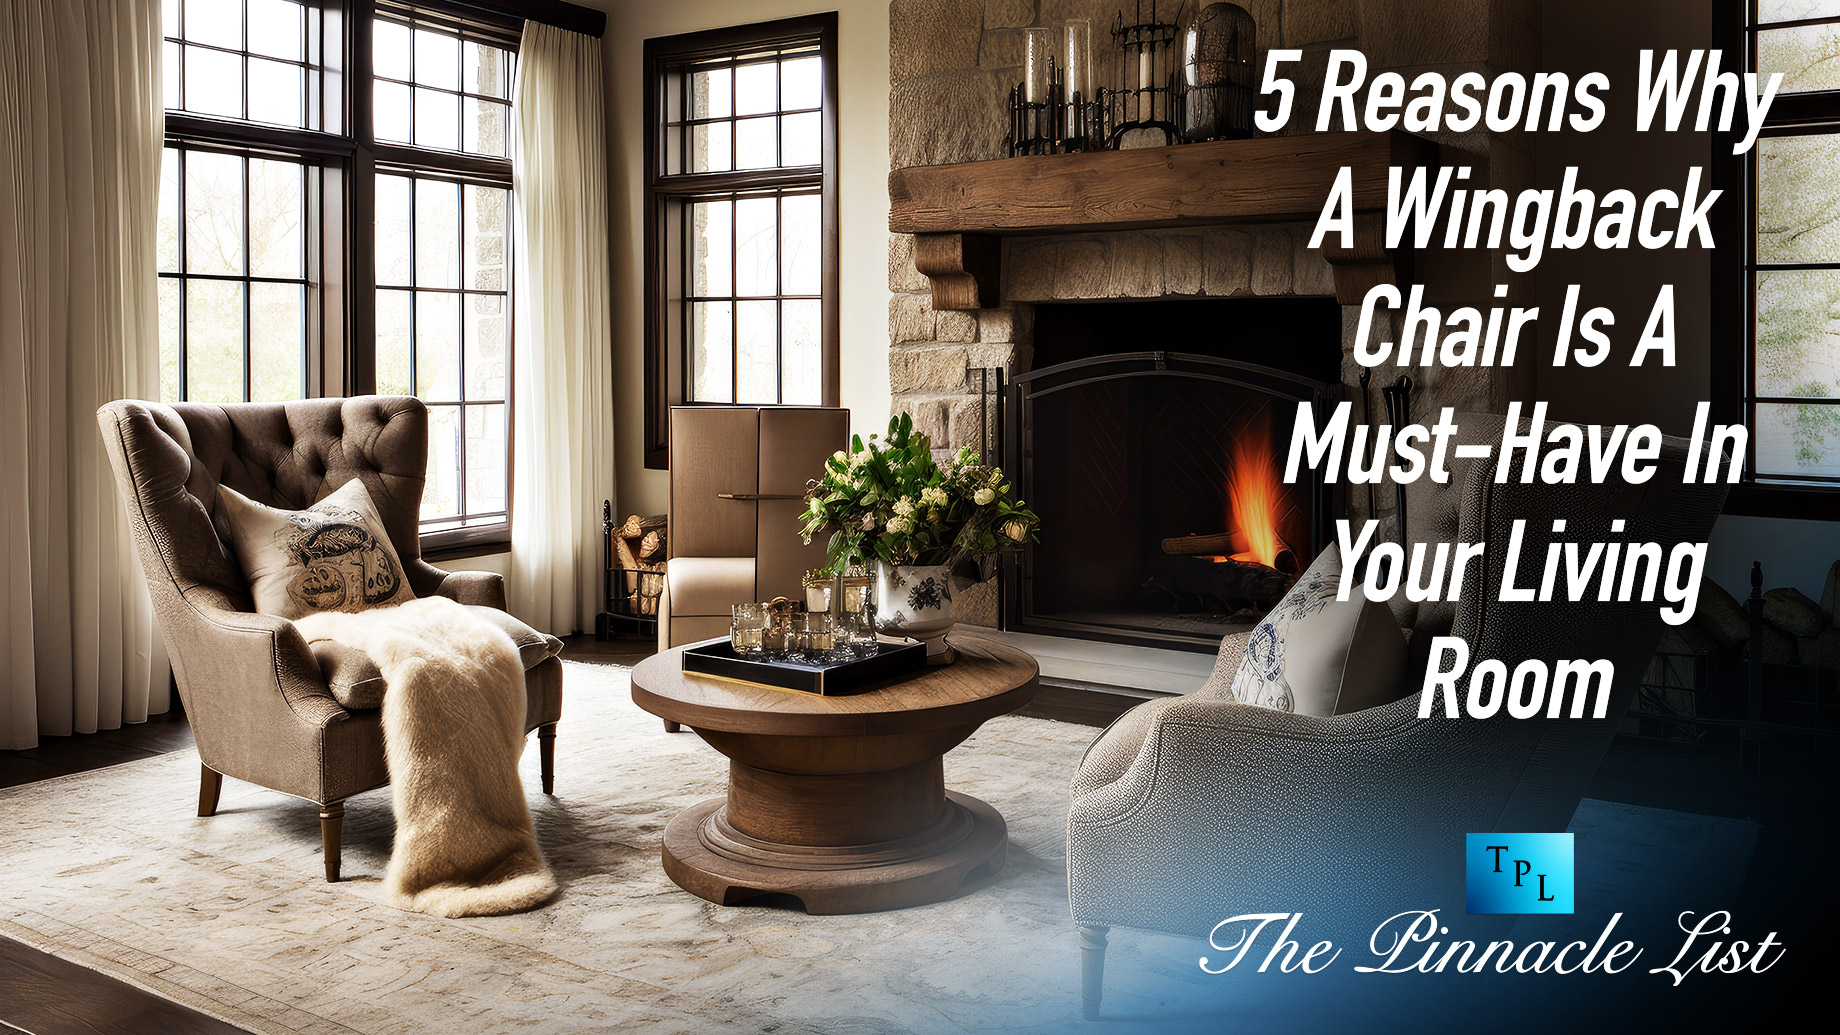 5 Reasons Why A Wingback Chair Is A Must-Have In Your Living Room – The Pinnacle List